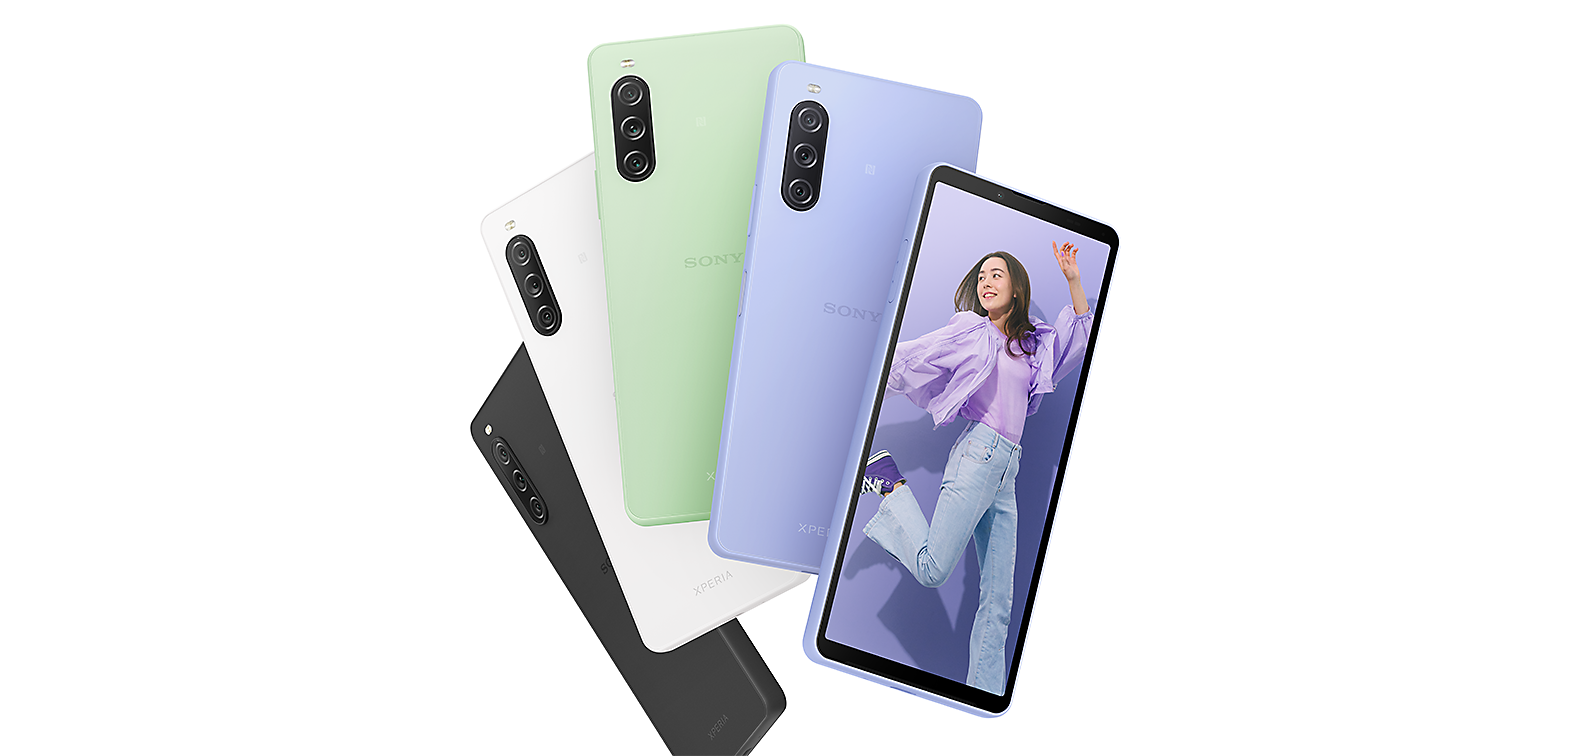 Rear-facing Xperia 10 V smartphones in Black, White, Sage Green and Lavender, plus a front-facing Xperia 10 V in Lavender, displaying an image of a young woman